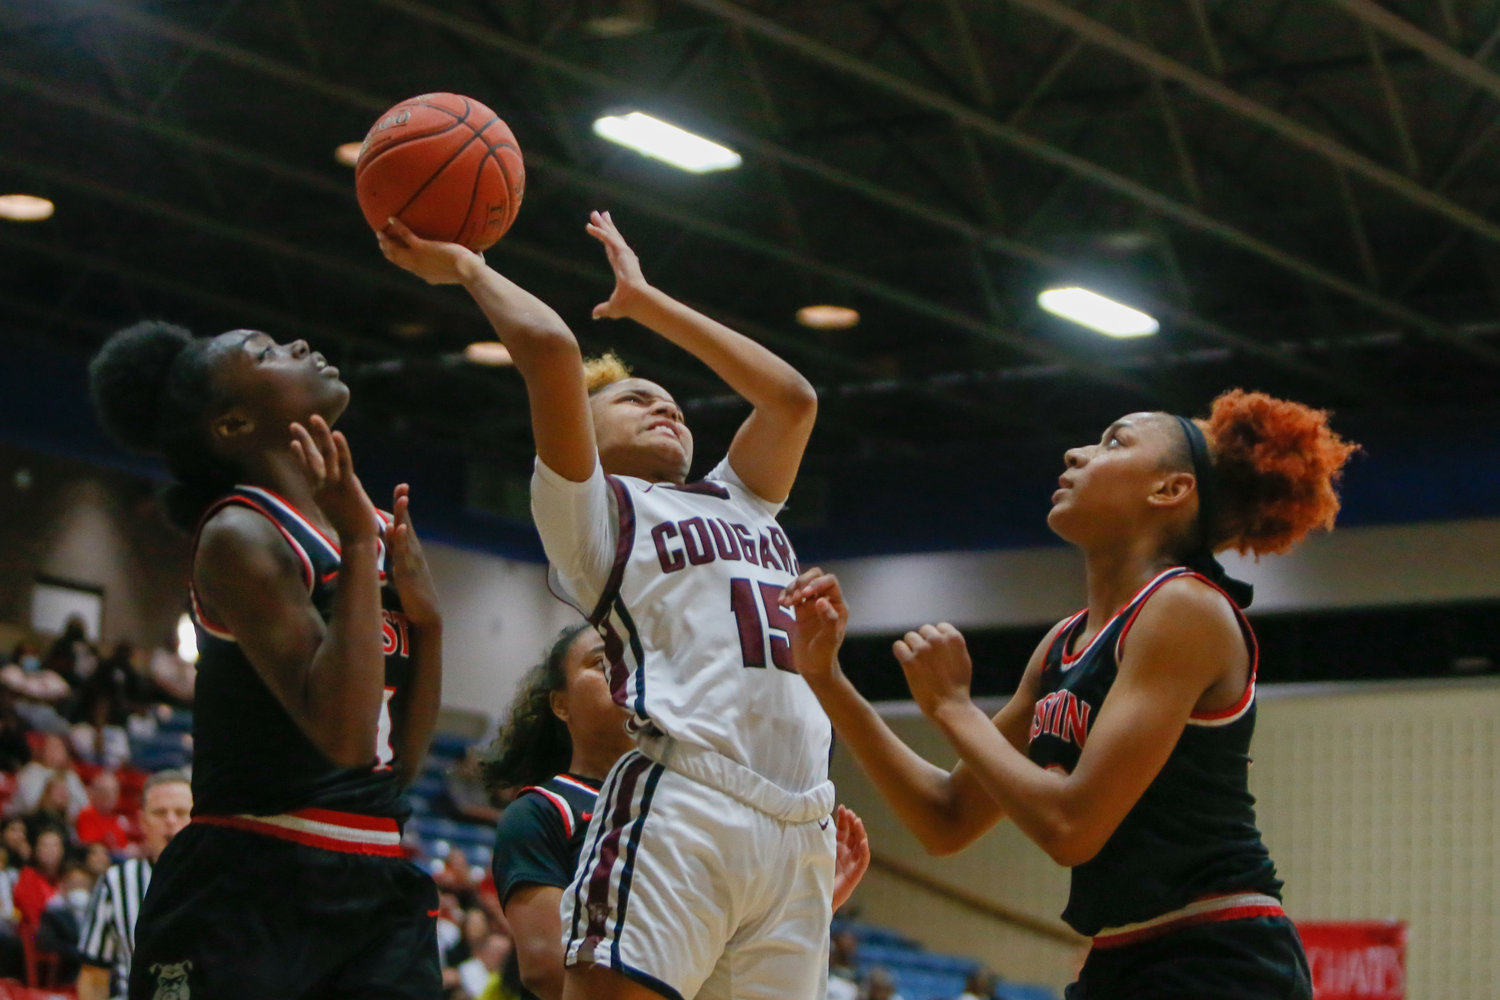 Daniele Williams shoots over defenders during Tuesday's game between Cinco Ranch and Fort Bend Autin.